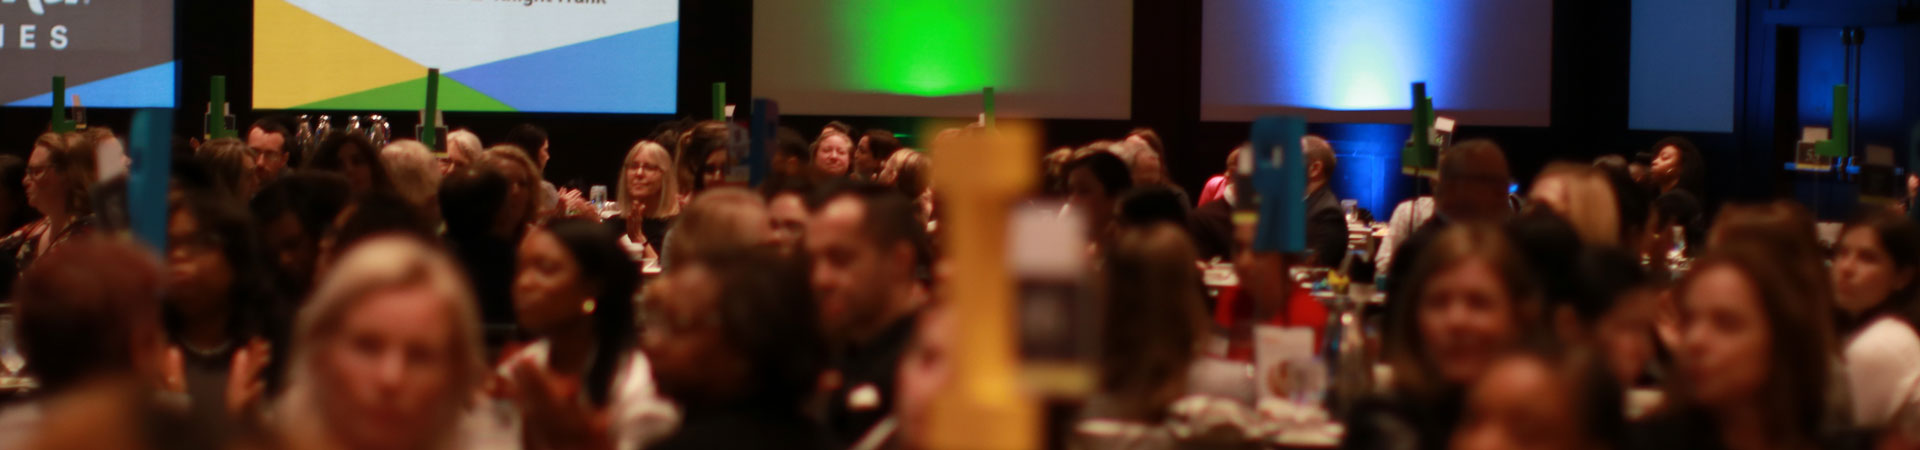  An indoor event filled with blurry attendees sitting at tables and a projector screen in the background. 